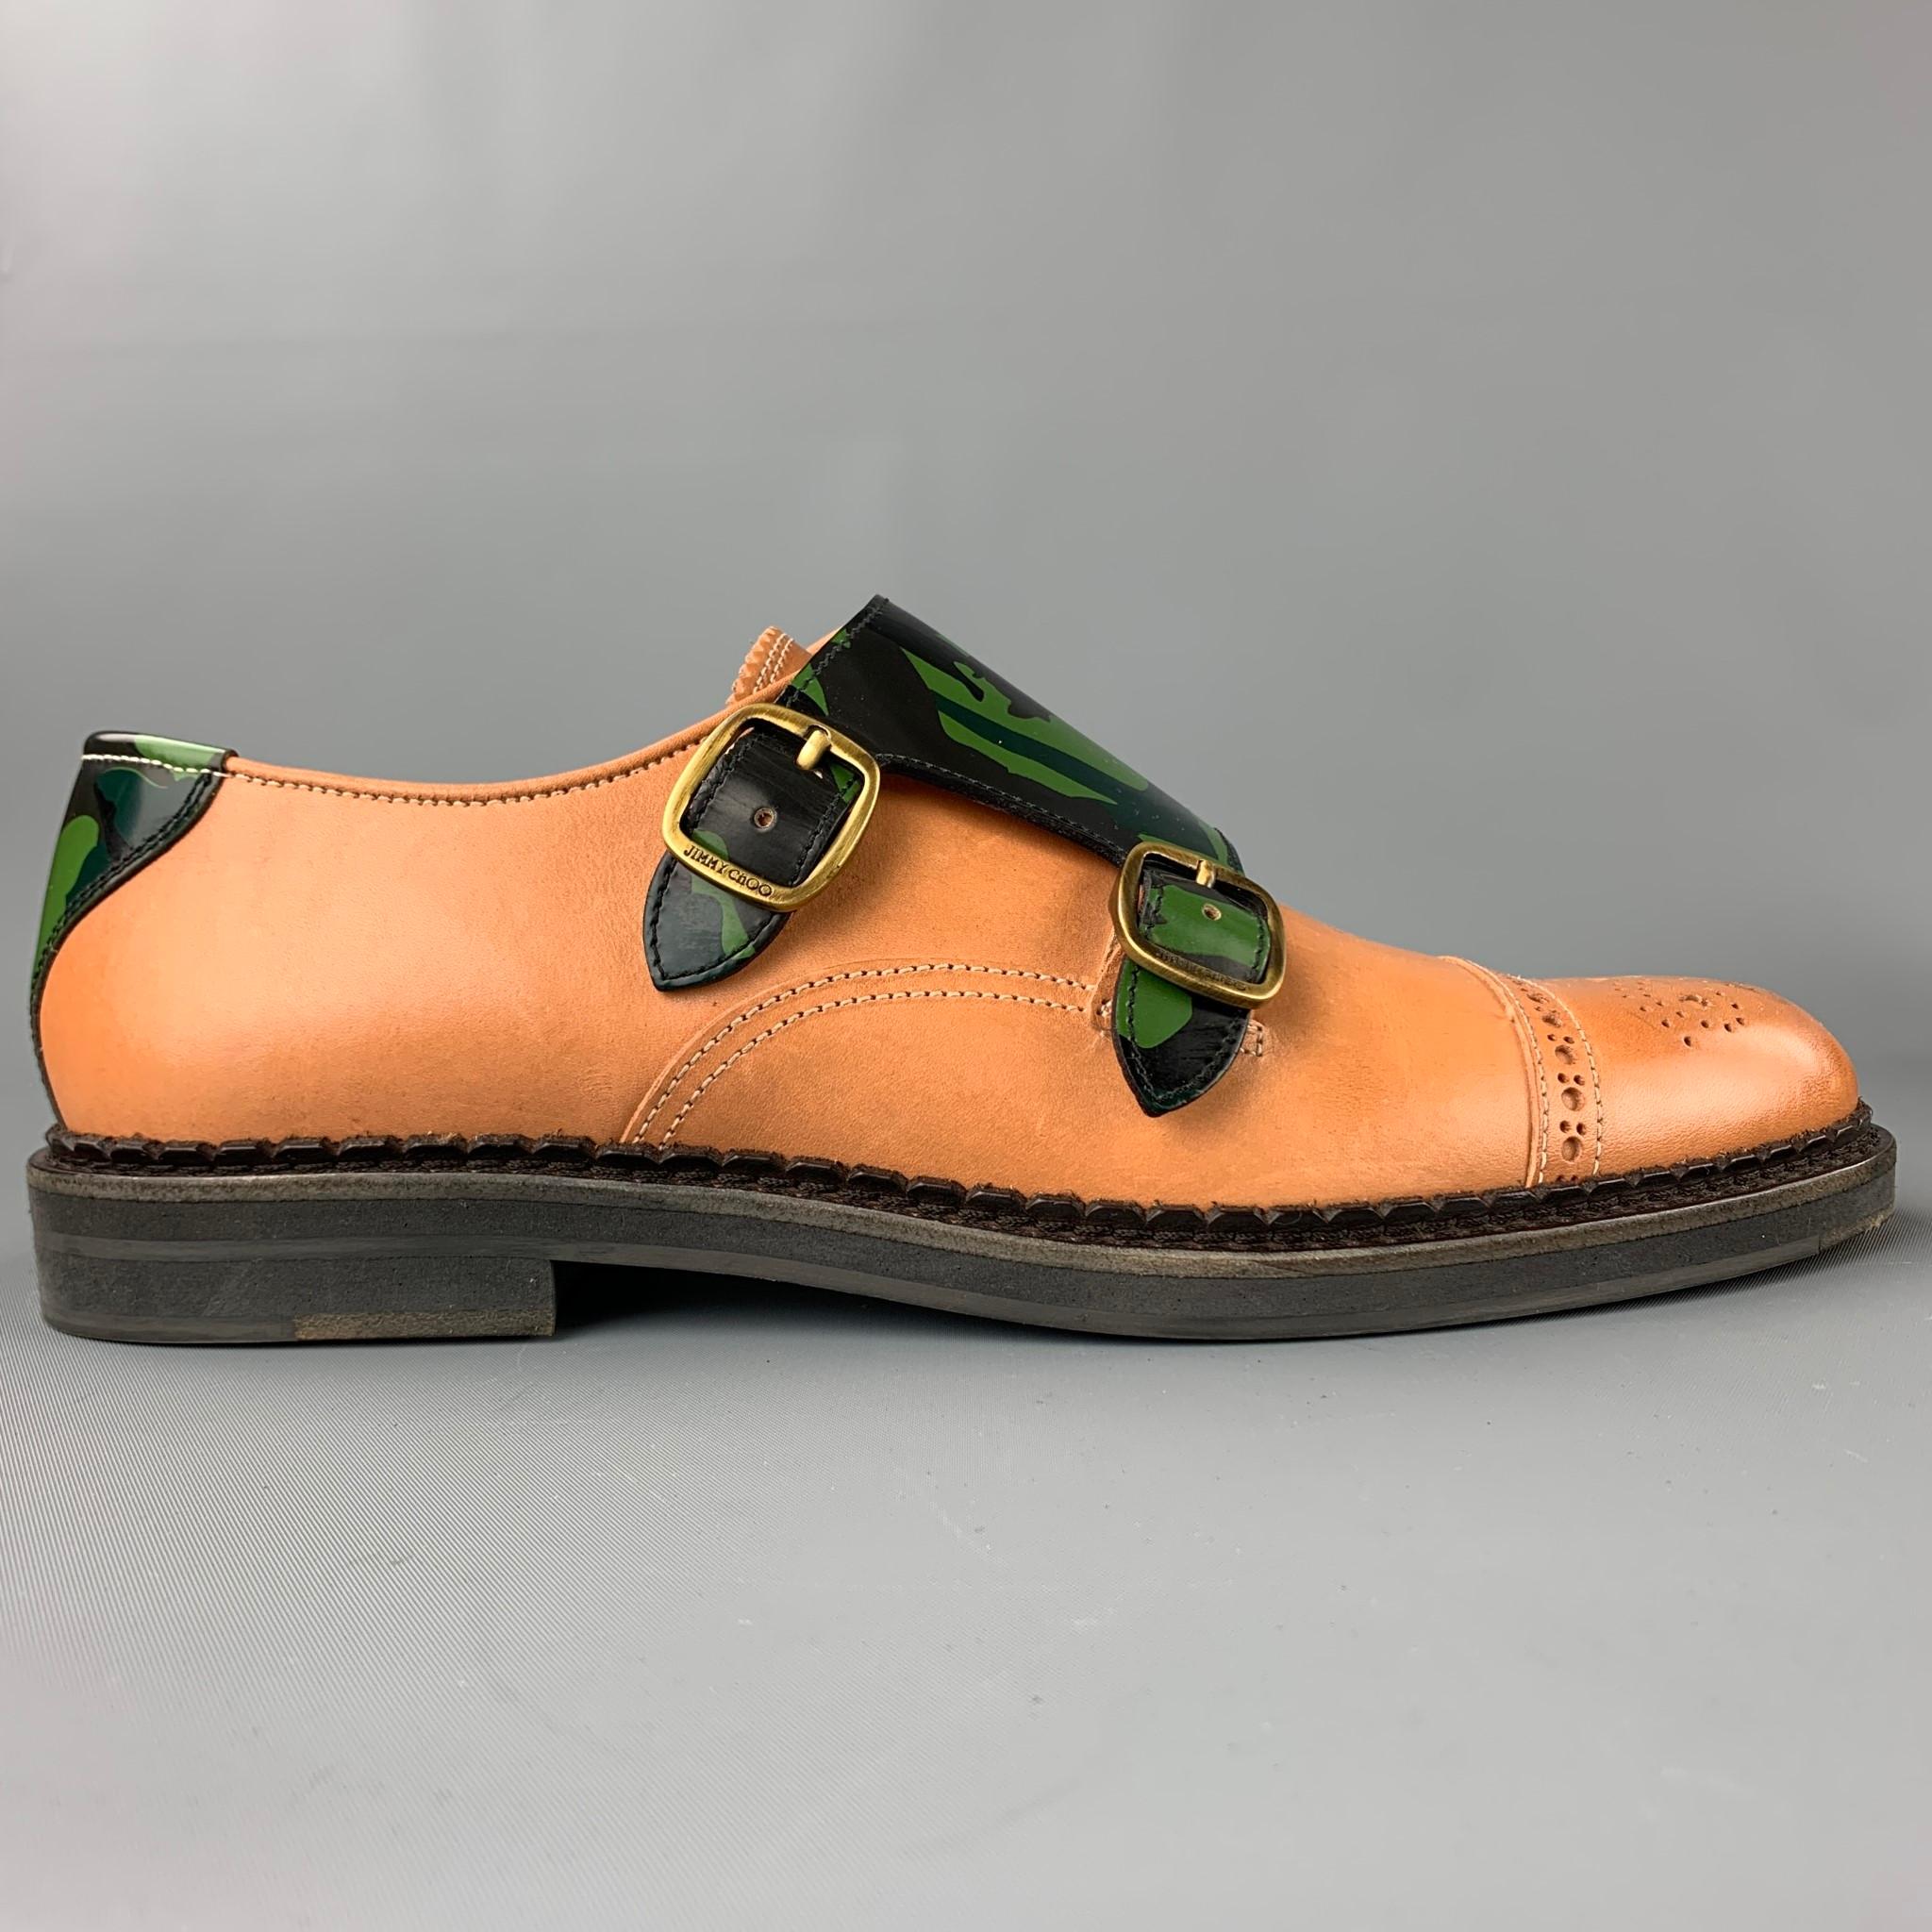 JIMMY CHOO loafers comes in a tan leather with a camouflage trim featuring a double monk strap, perforated, and a rubber sole. Made in Italy.

Excellent Pre-Owned Condition.
Marked: EU 41
Original Retail Price: $895.00

Measurements:

12 in. x 4 in.